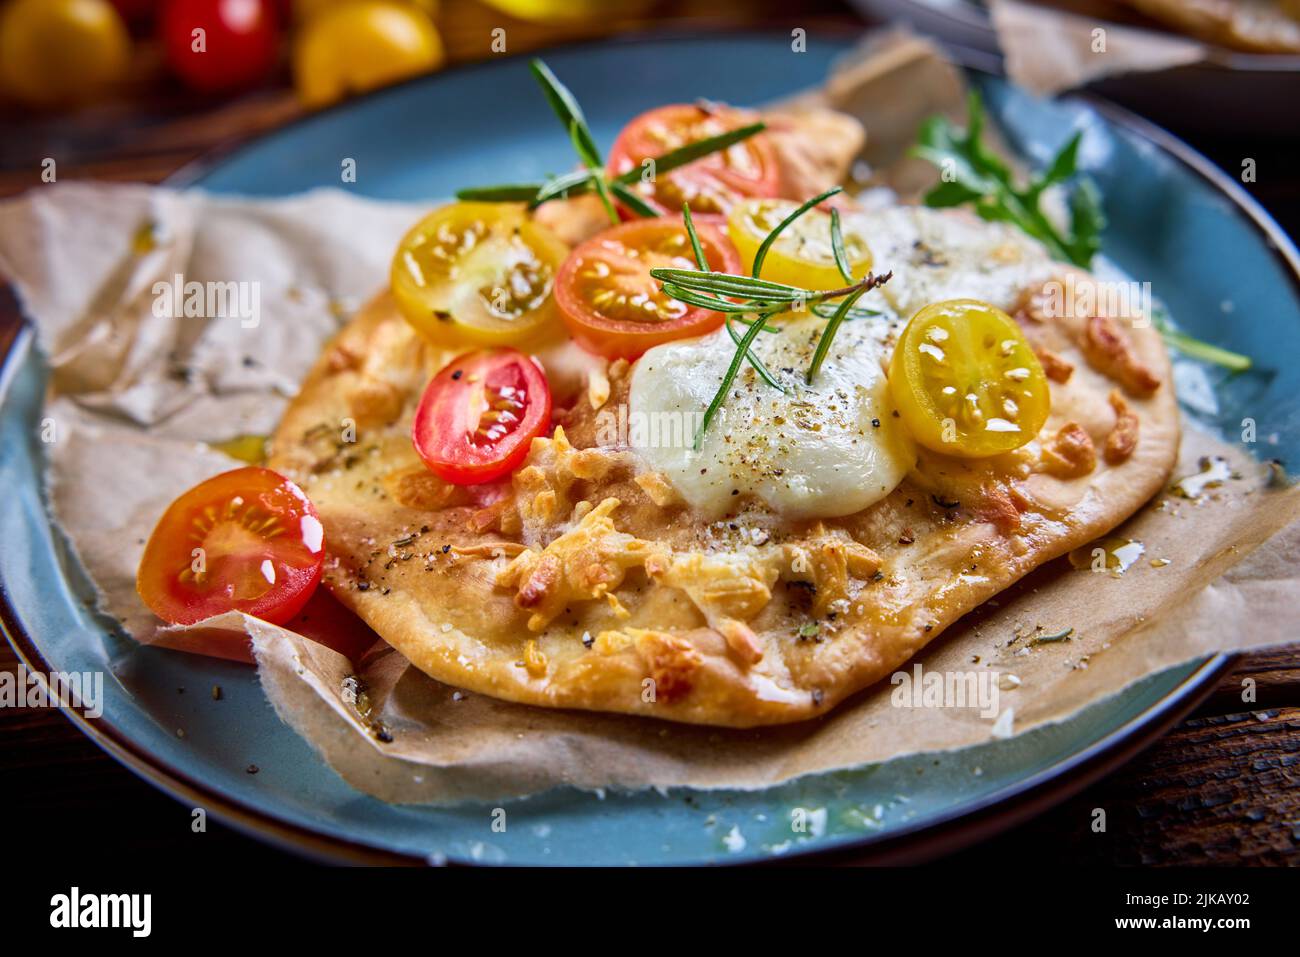 From above of appetizing flatbread pizza with red and yellow cherry tomatoes mozzarella cheese and herbs topped with olive oil and served on plate in Stock Photo